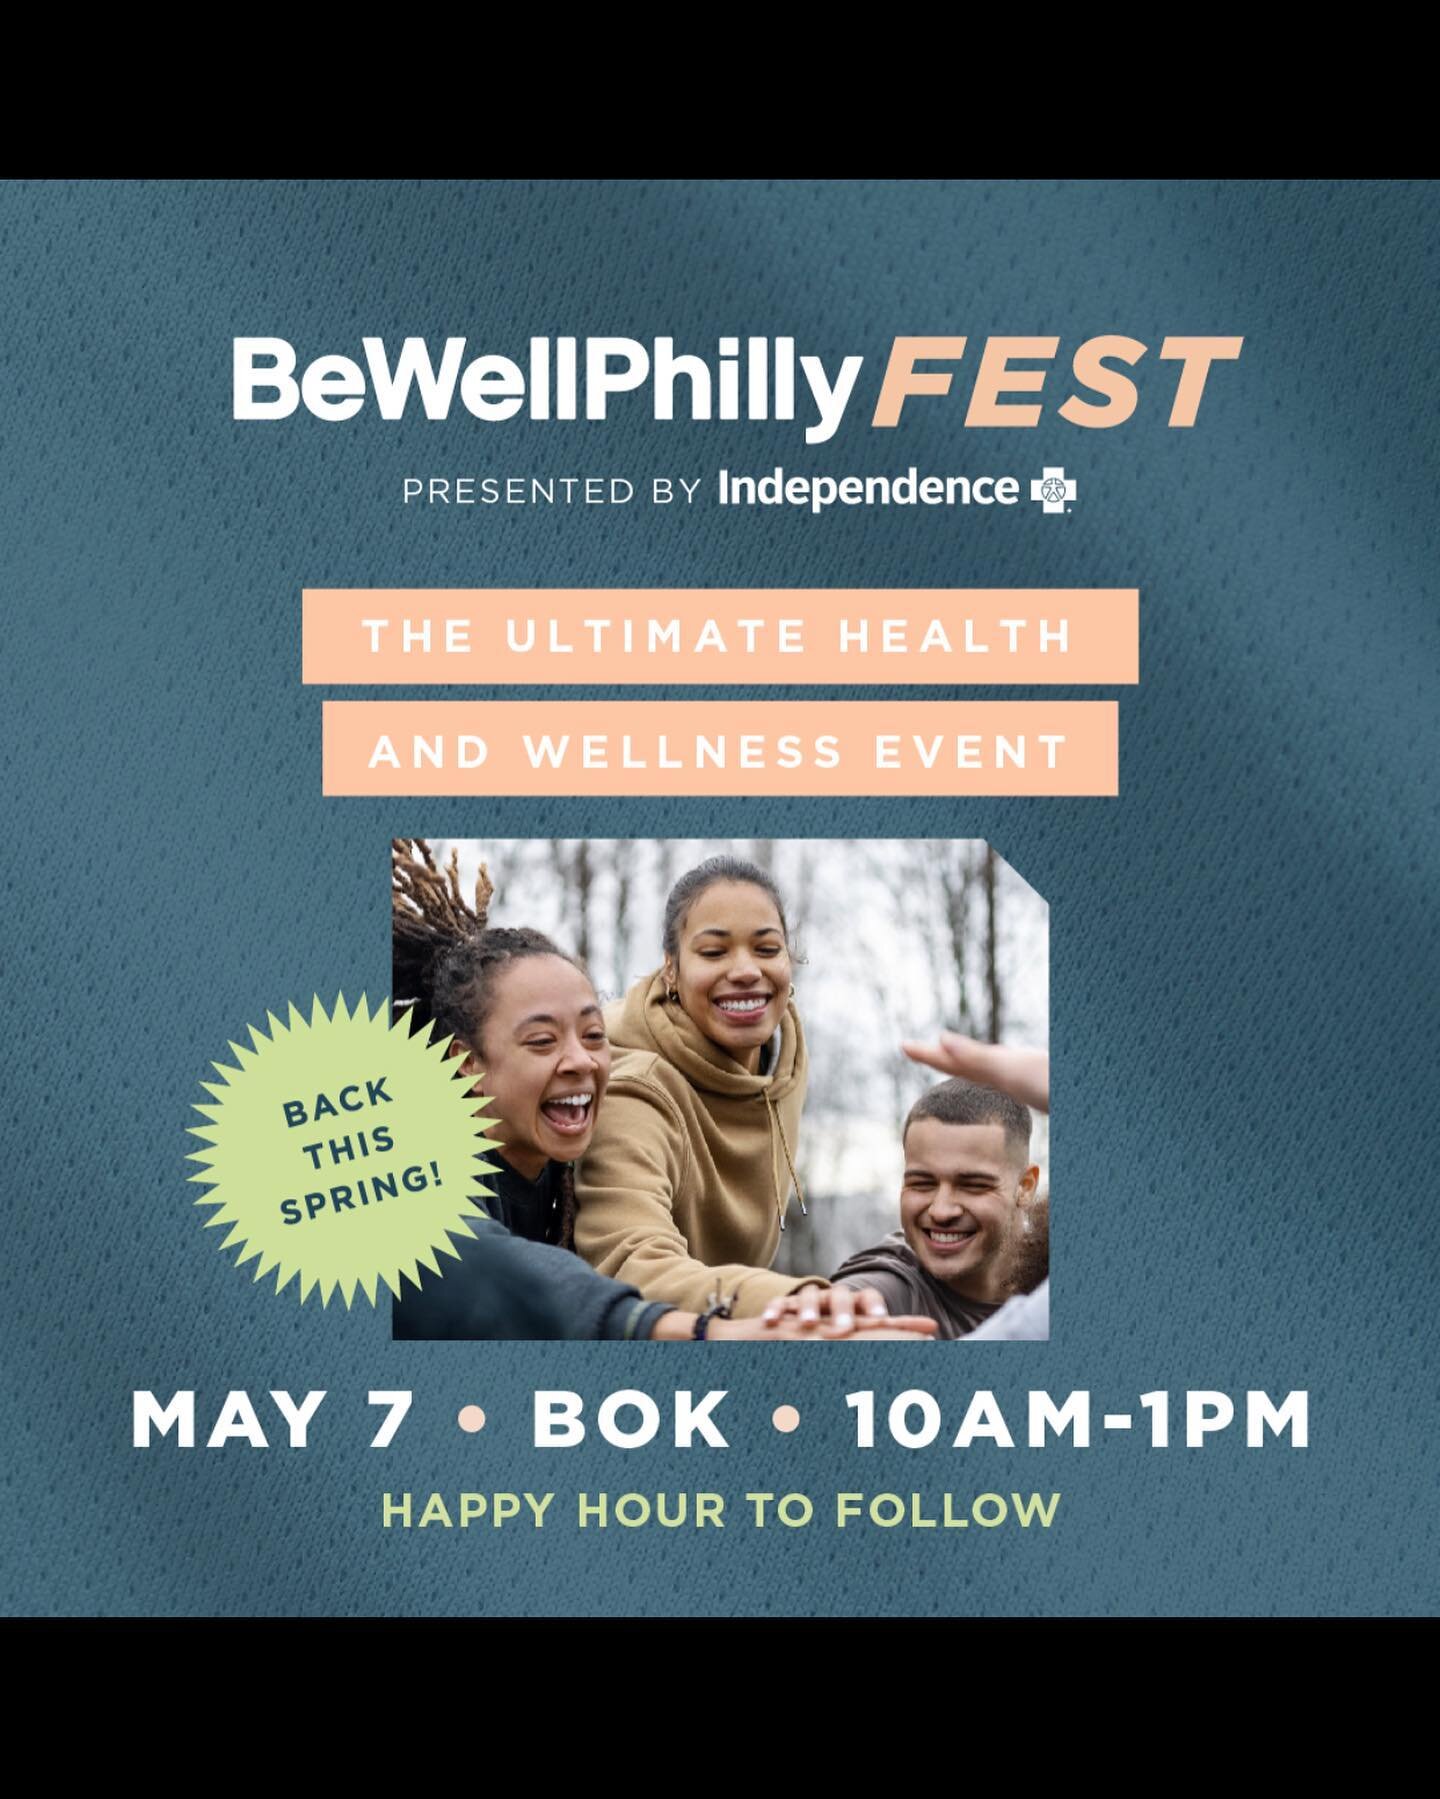 We are elated to announce our participation in this year&rsquo;s #BeWellPhillyFest presented by @phillymag, @bewellphilly, &amp; @independencebluecross! This annual wellness festival highlights a wide variety of professionals, leaders and entrepreneu